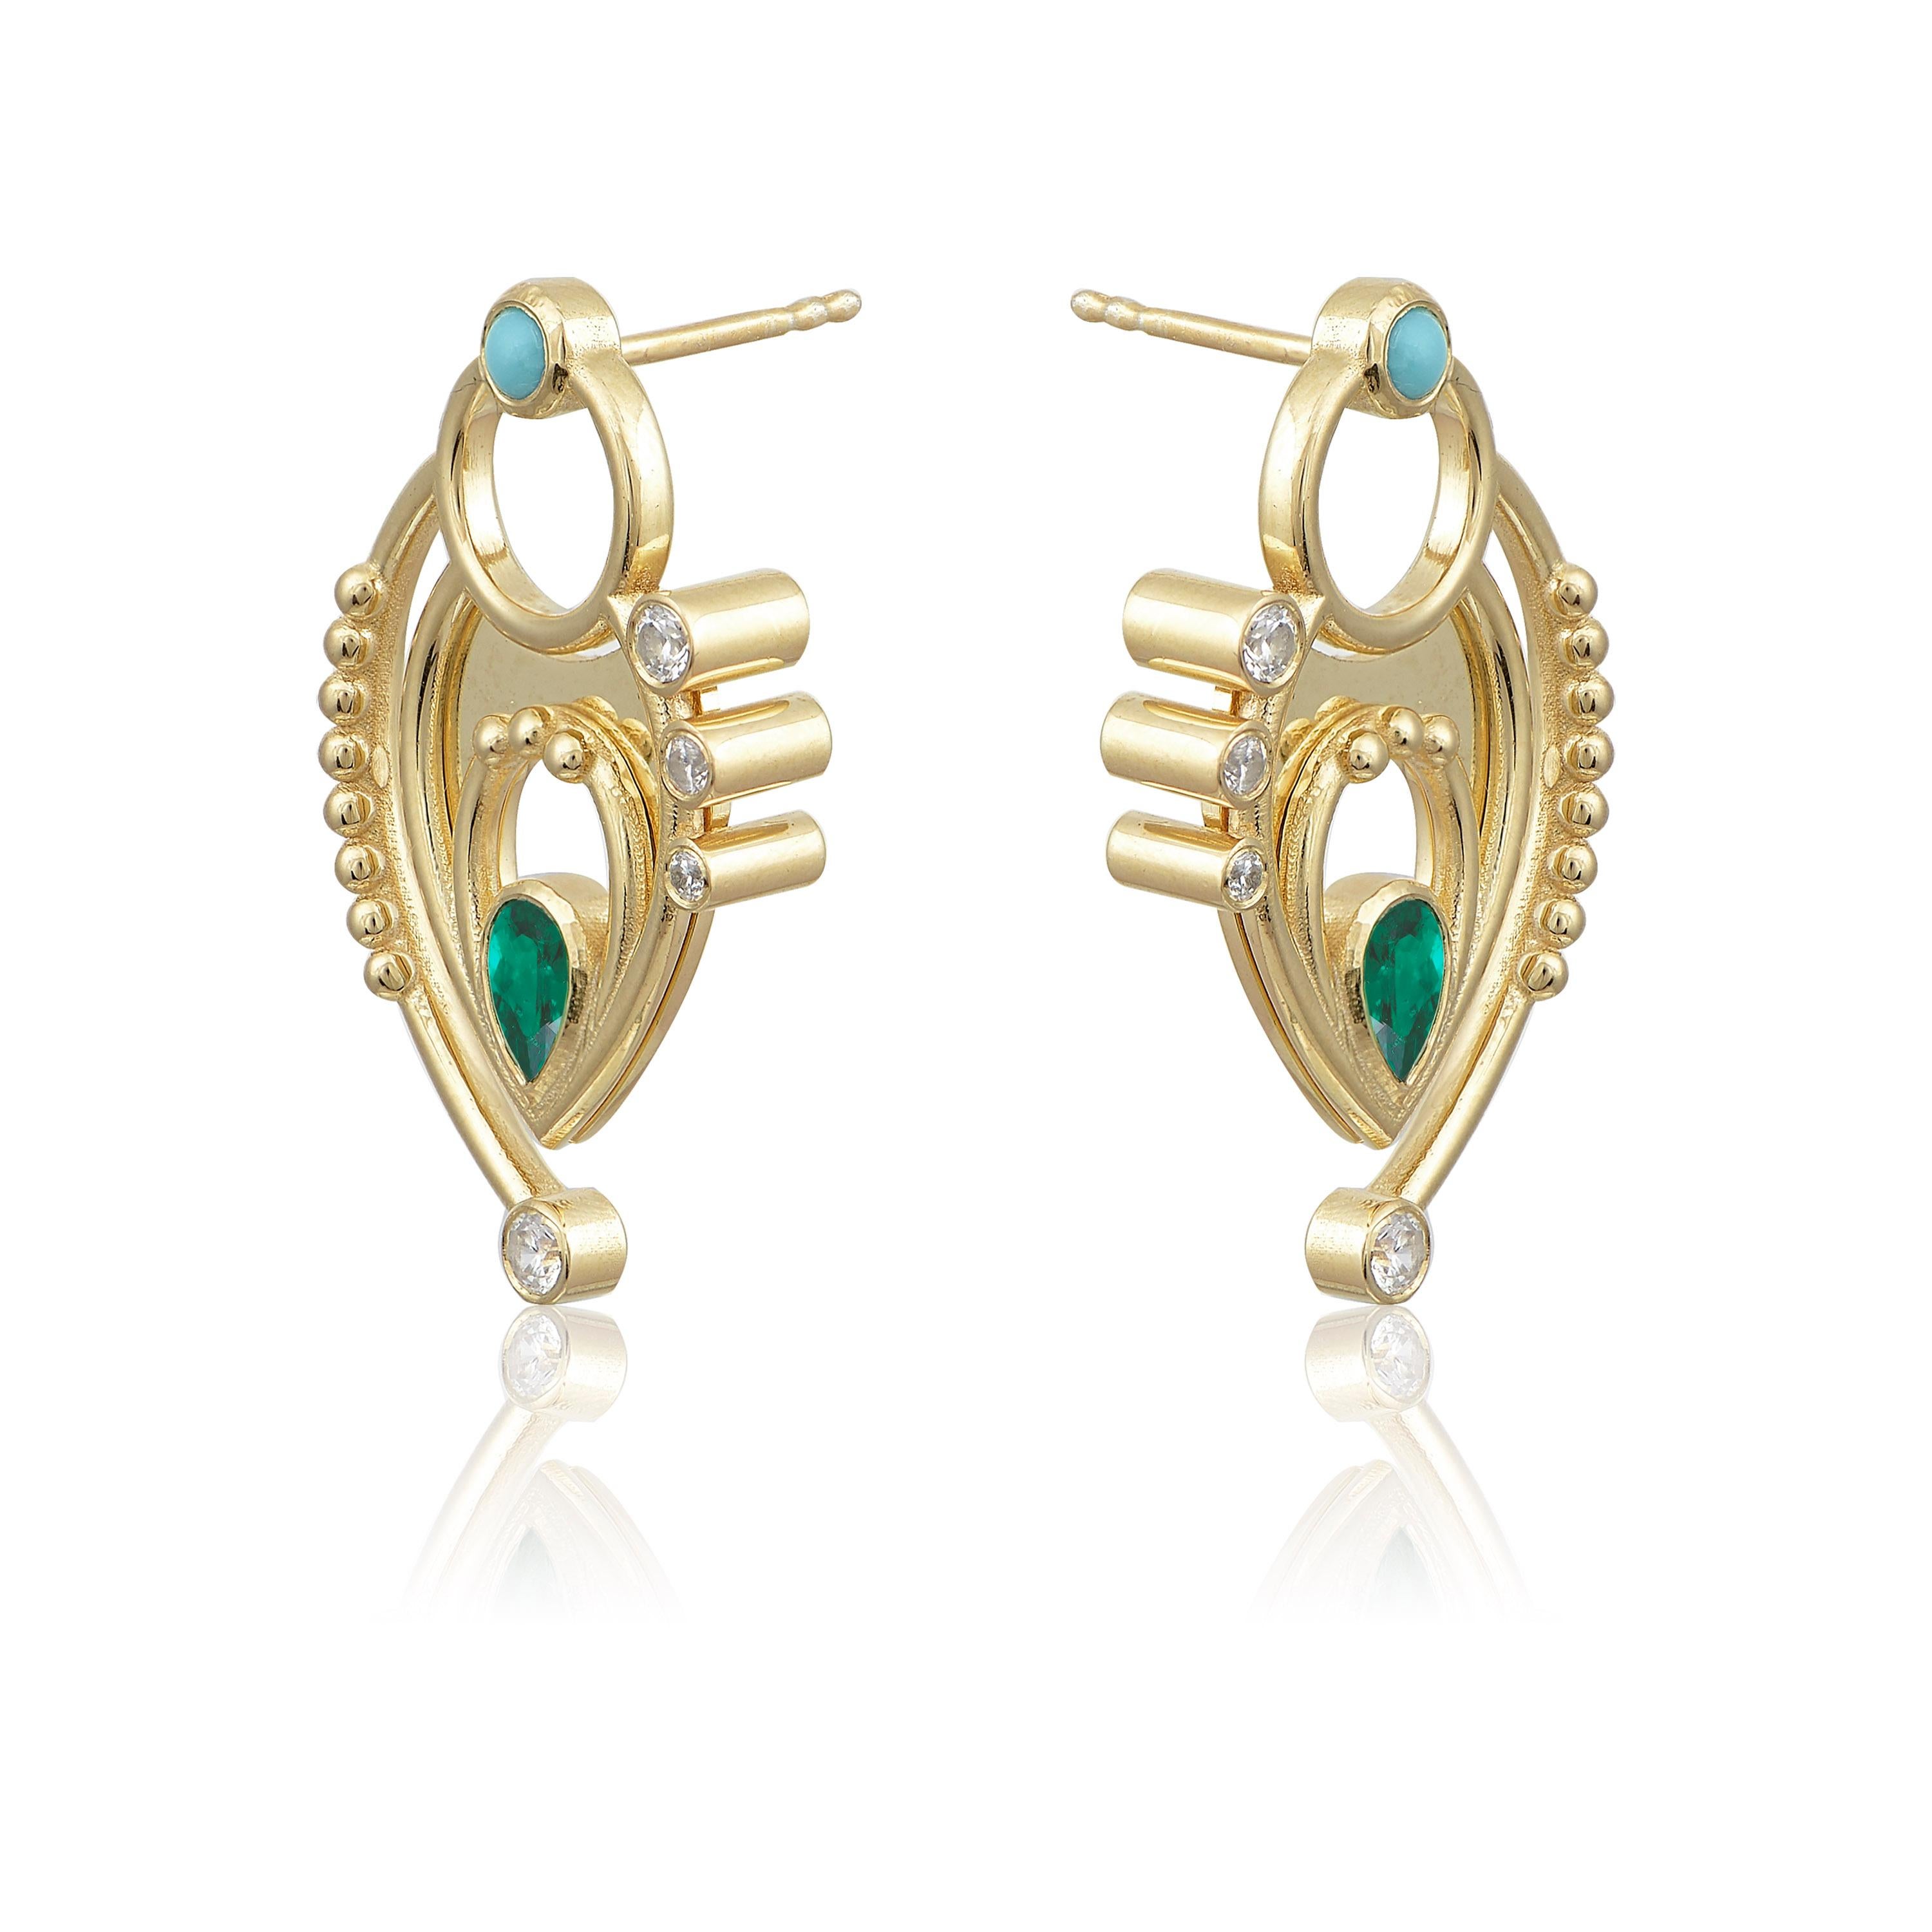 Designer: Alexia Gryllaki

Dimensions: motif L30x18mm
Weight: approximately 13.8g (pair)
Barcode: NEX4021


Gold Textures pear-shaped earrings in 18 karat yellow gold with pear-shaped emeralds approx. 0.80cts, round brilliant-cut diamonds approx.